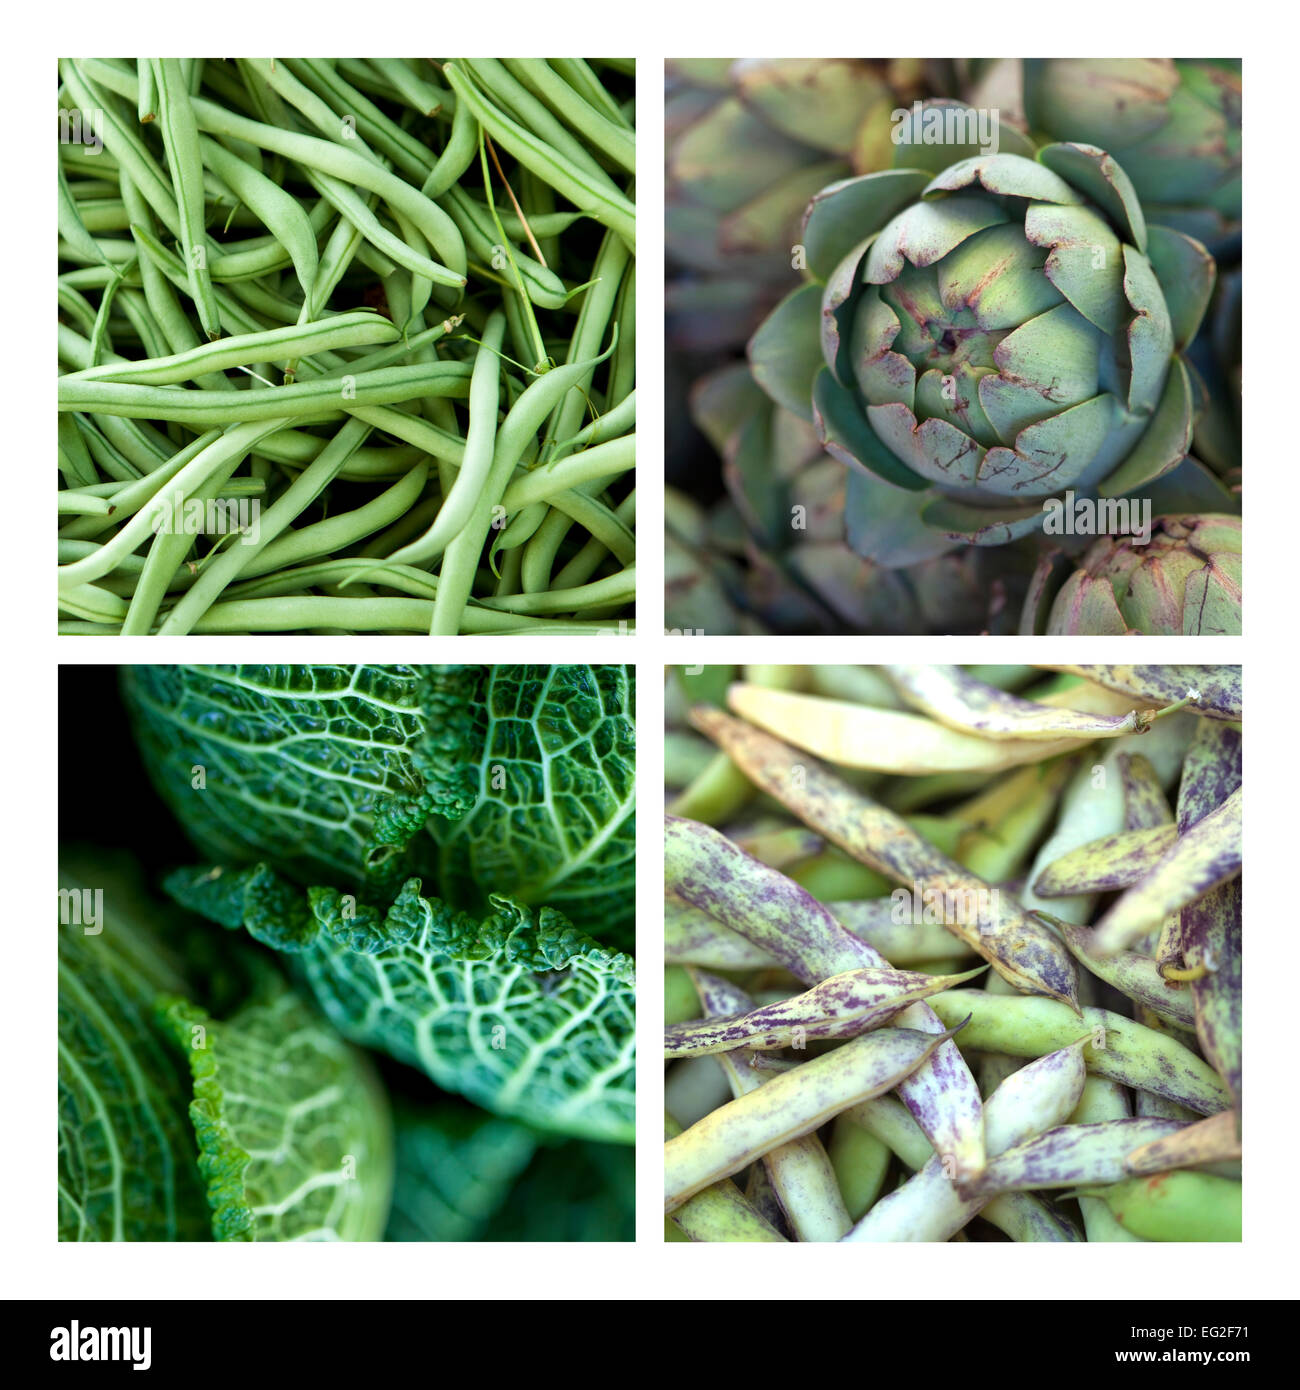 Collage of various vegetable on a market stall Stock Photo